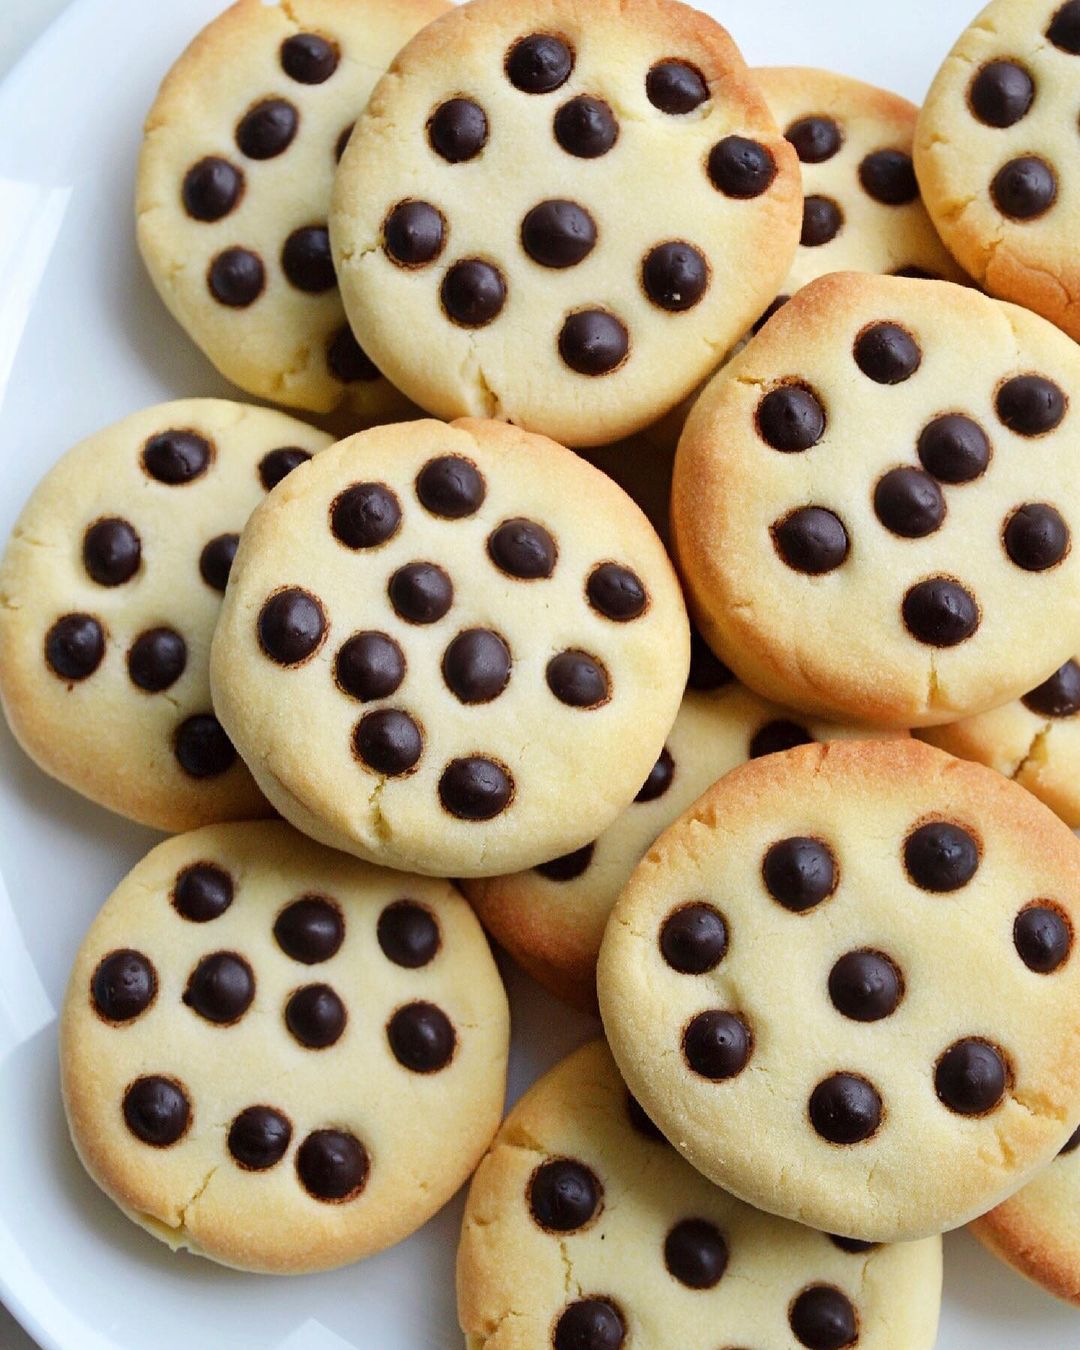 Shortbread cookies with chocolate drops